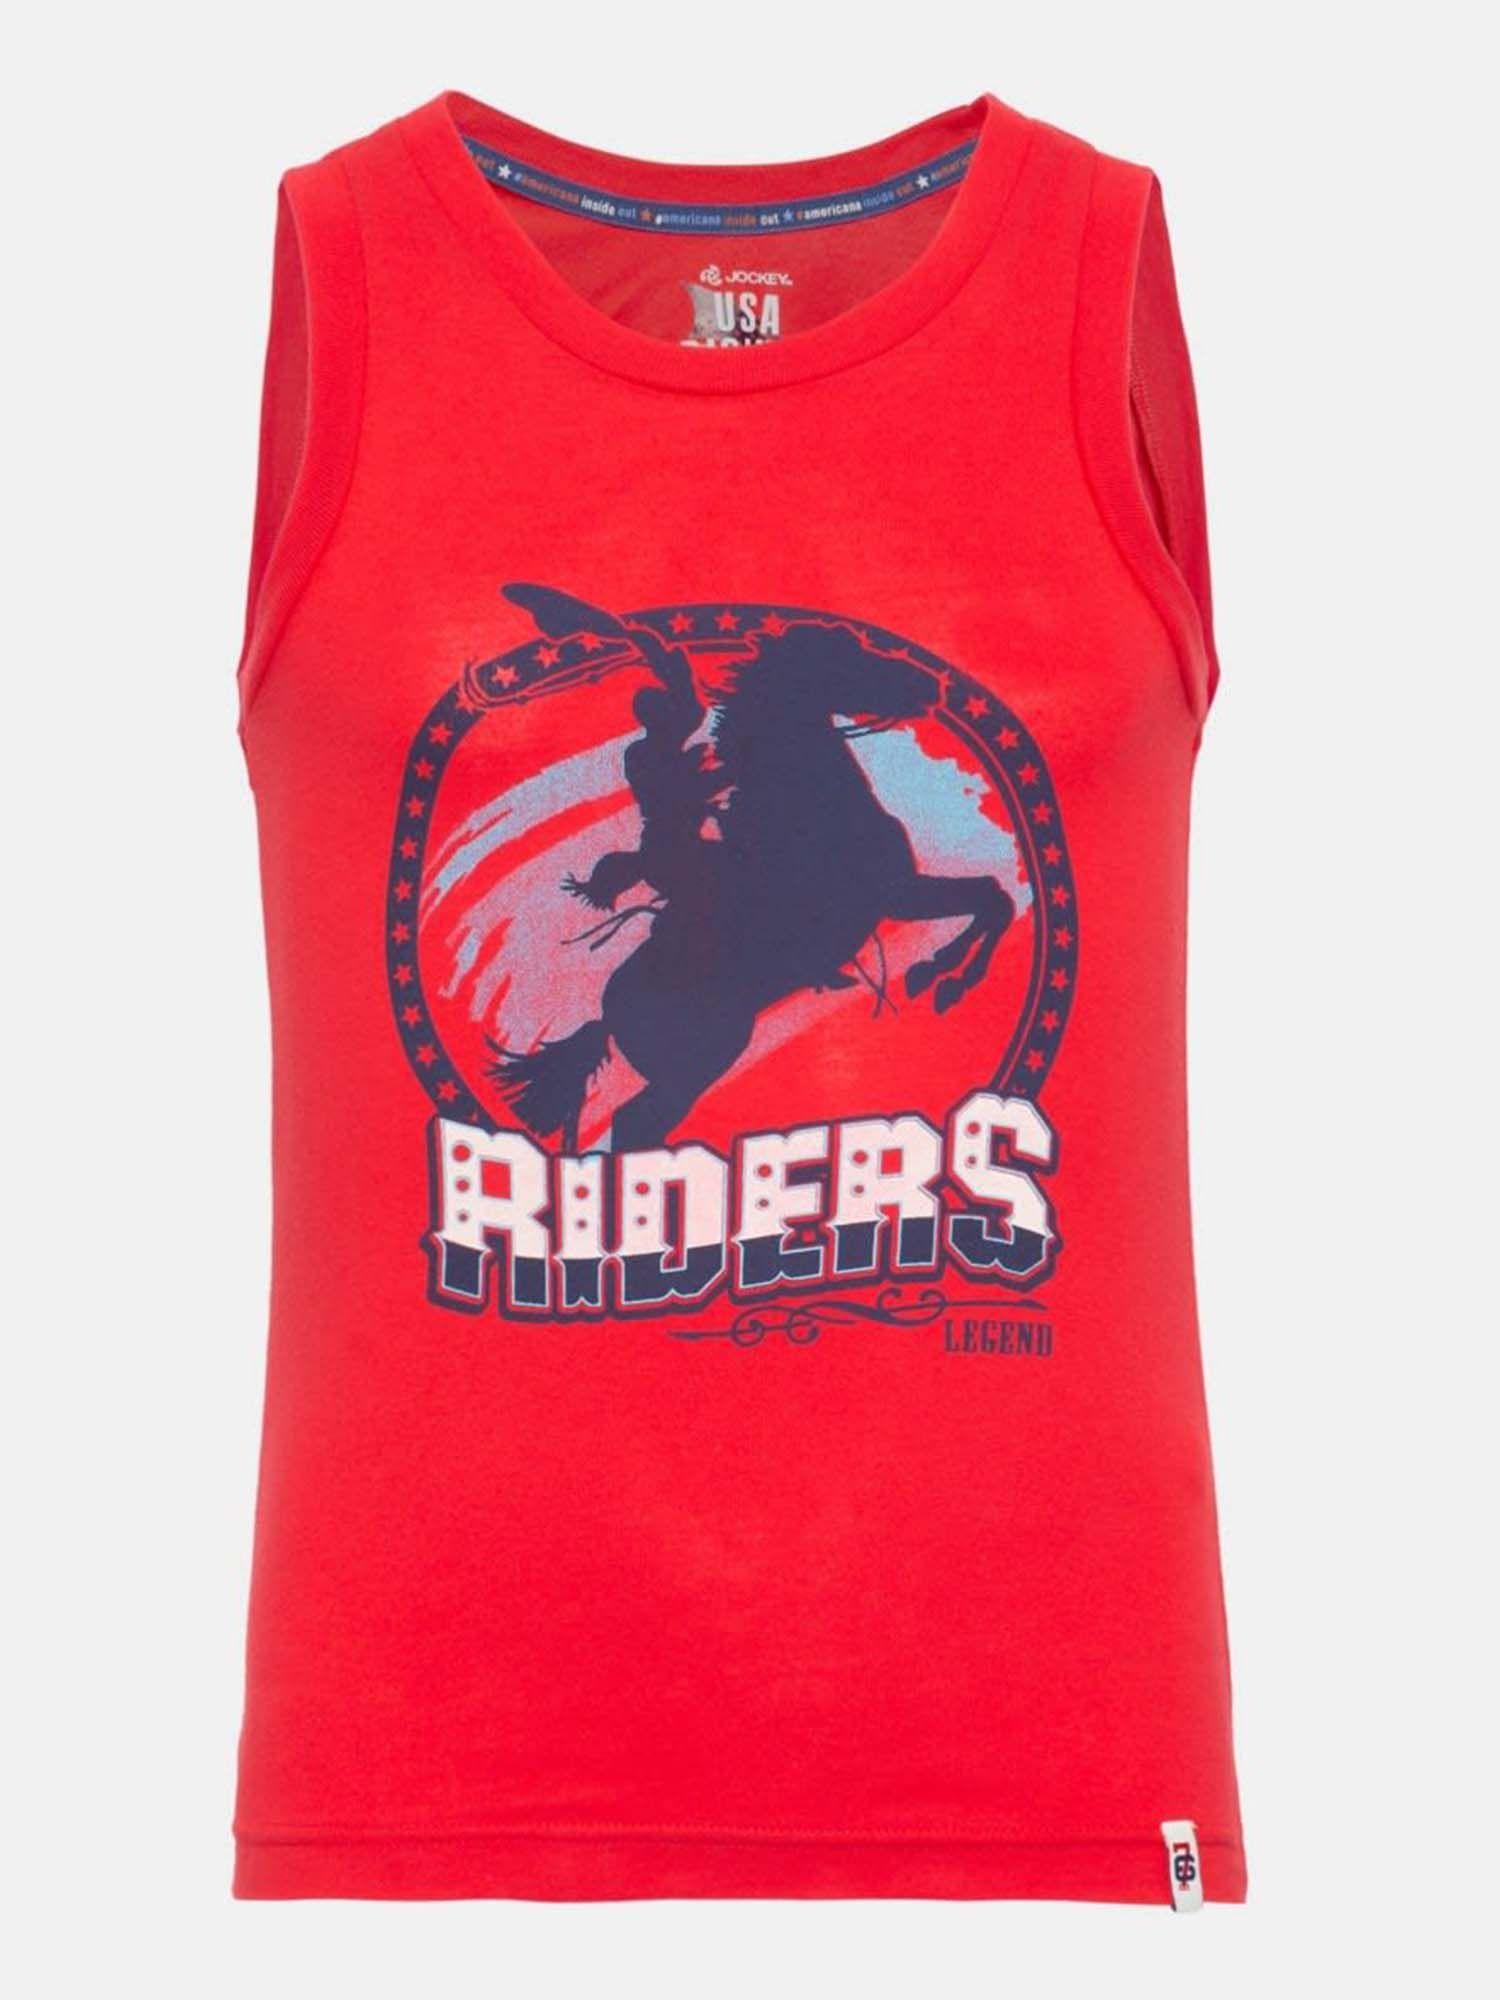 team red tank top - style number - (ub10)